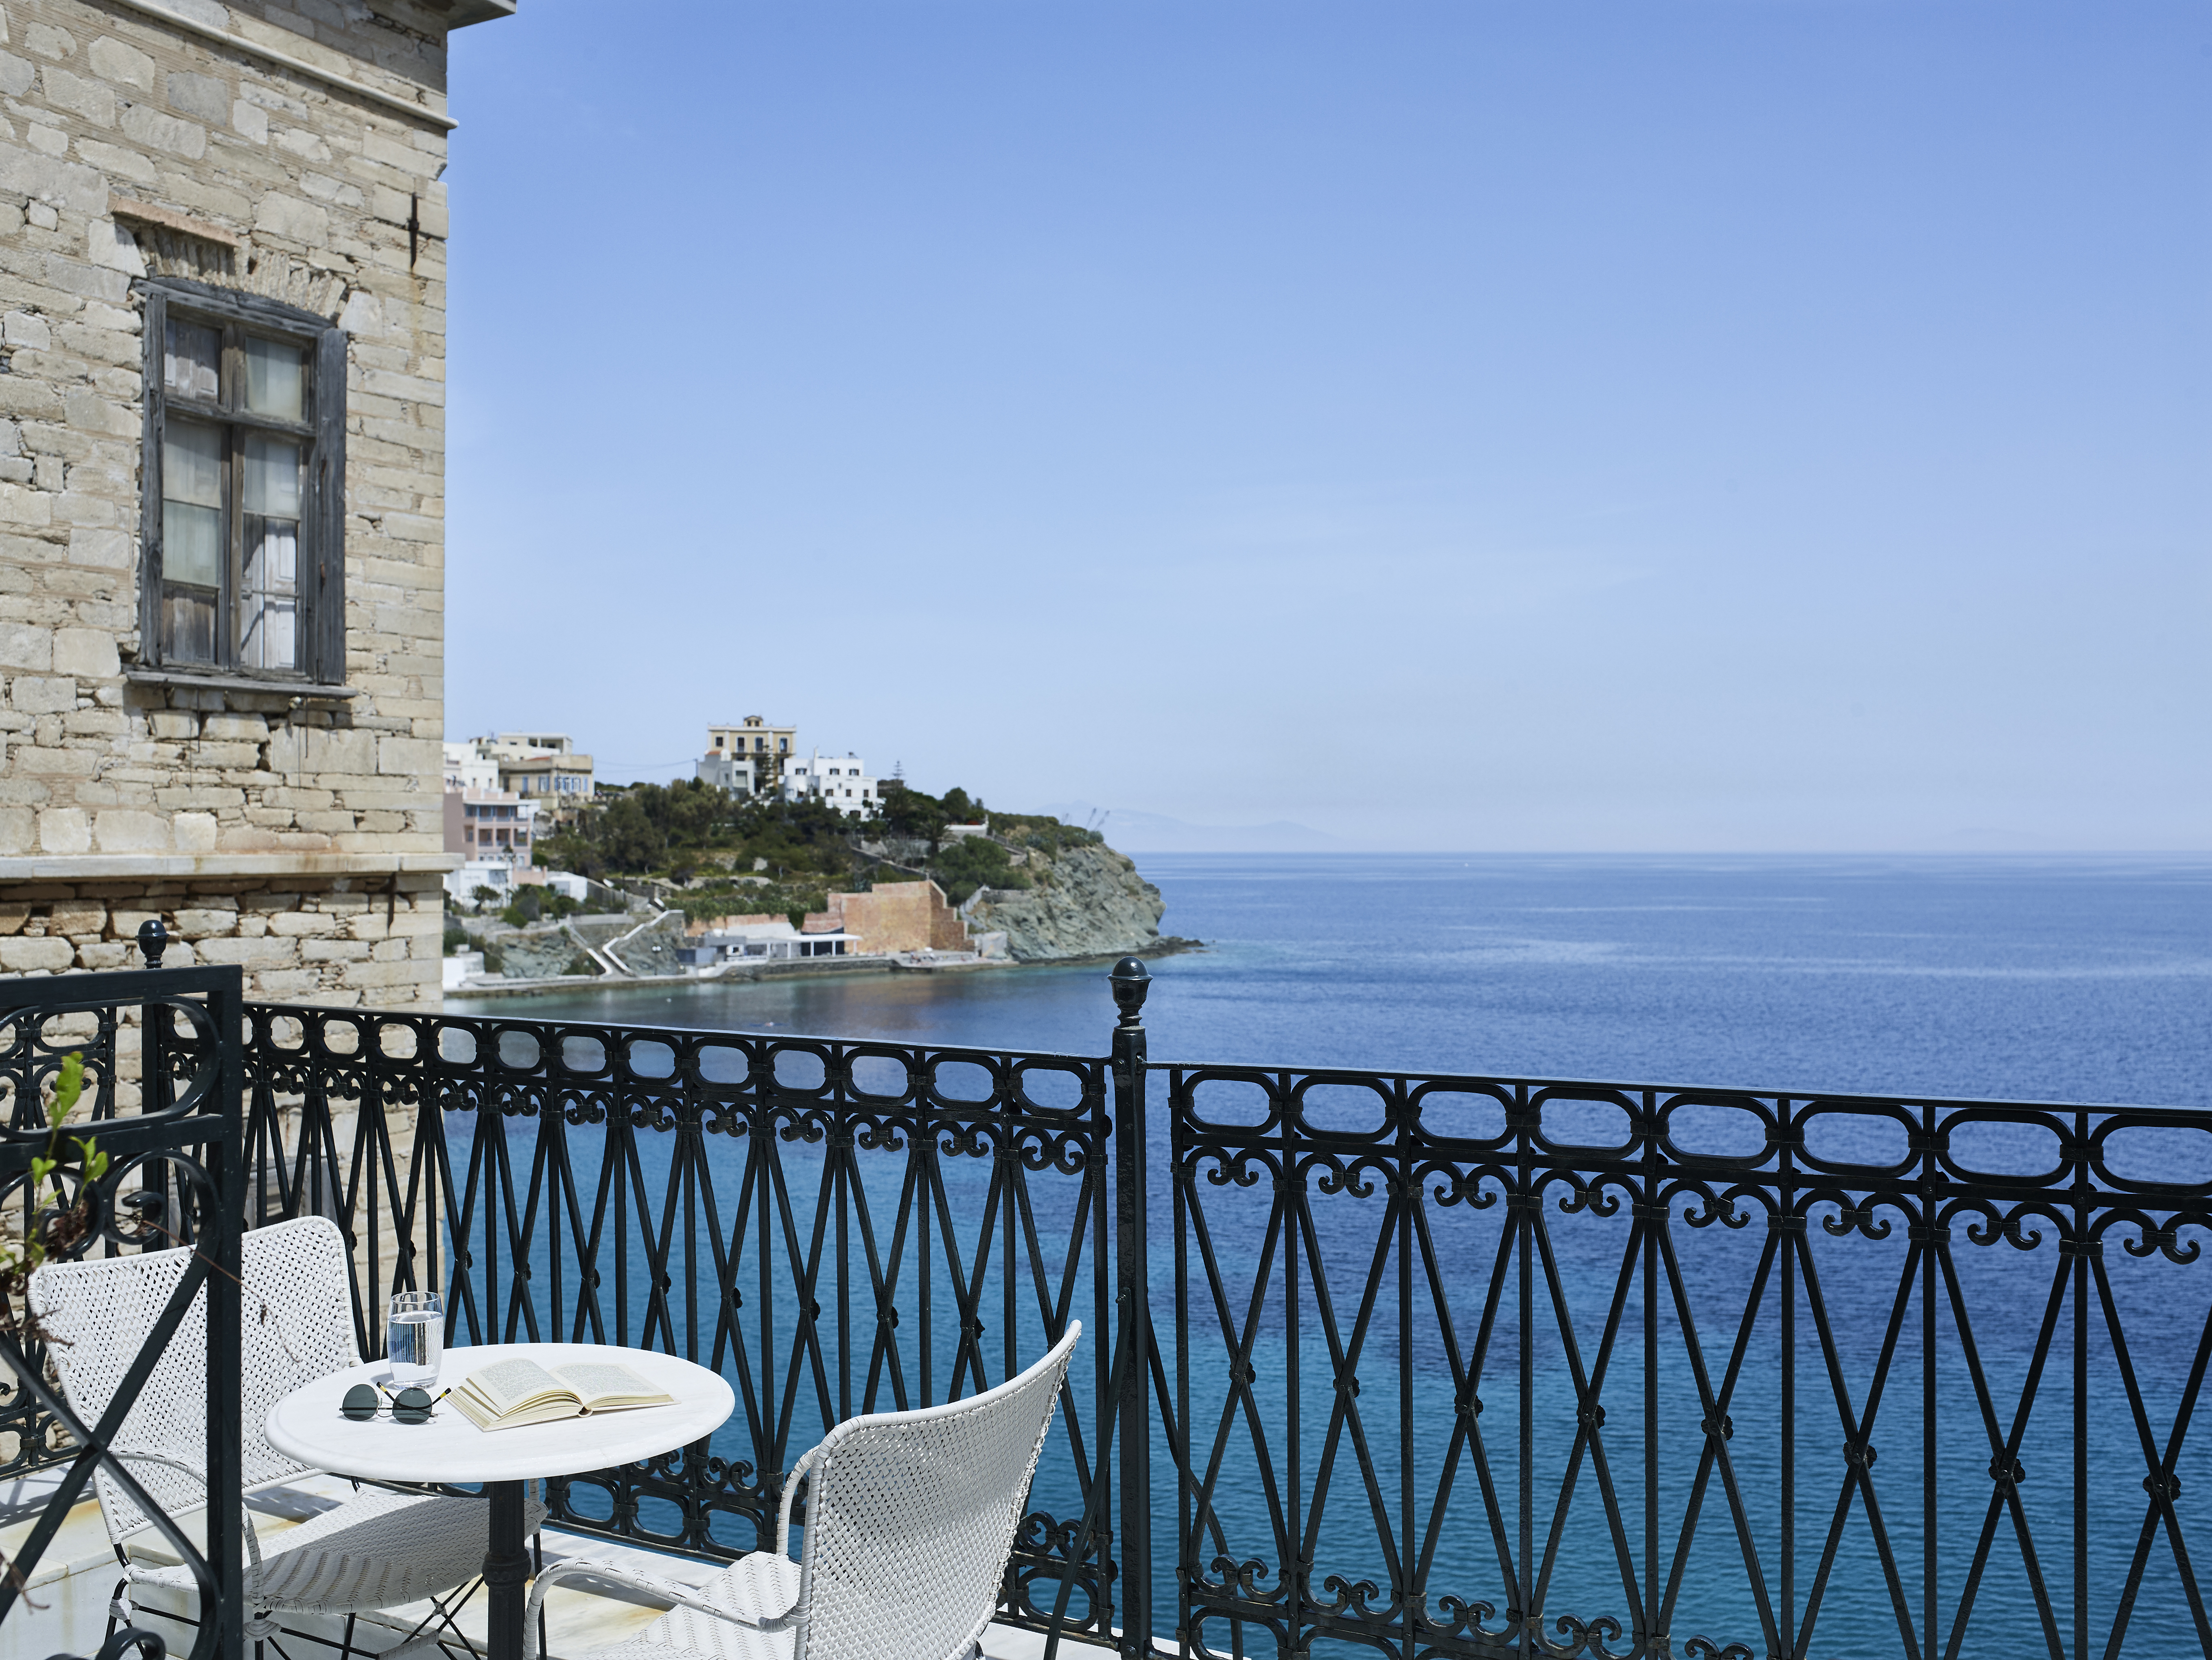 Hotel Ploes' views of the Aegean Sea make it one of the best hotels in Syros Greece. 